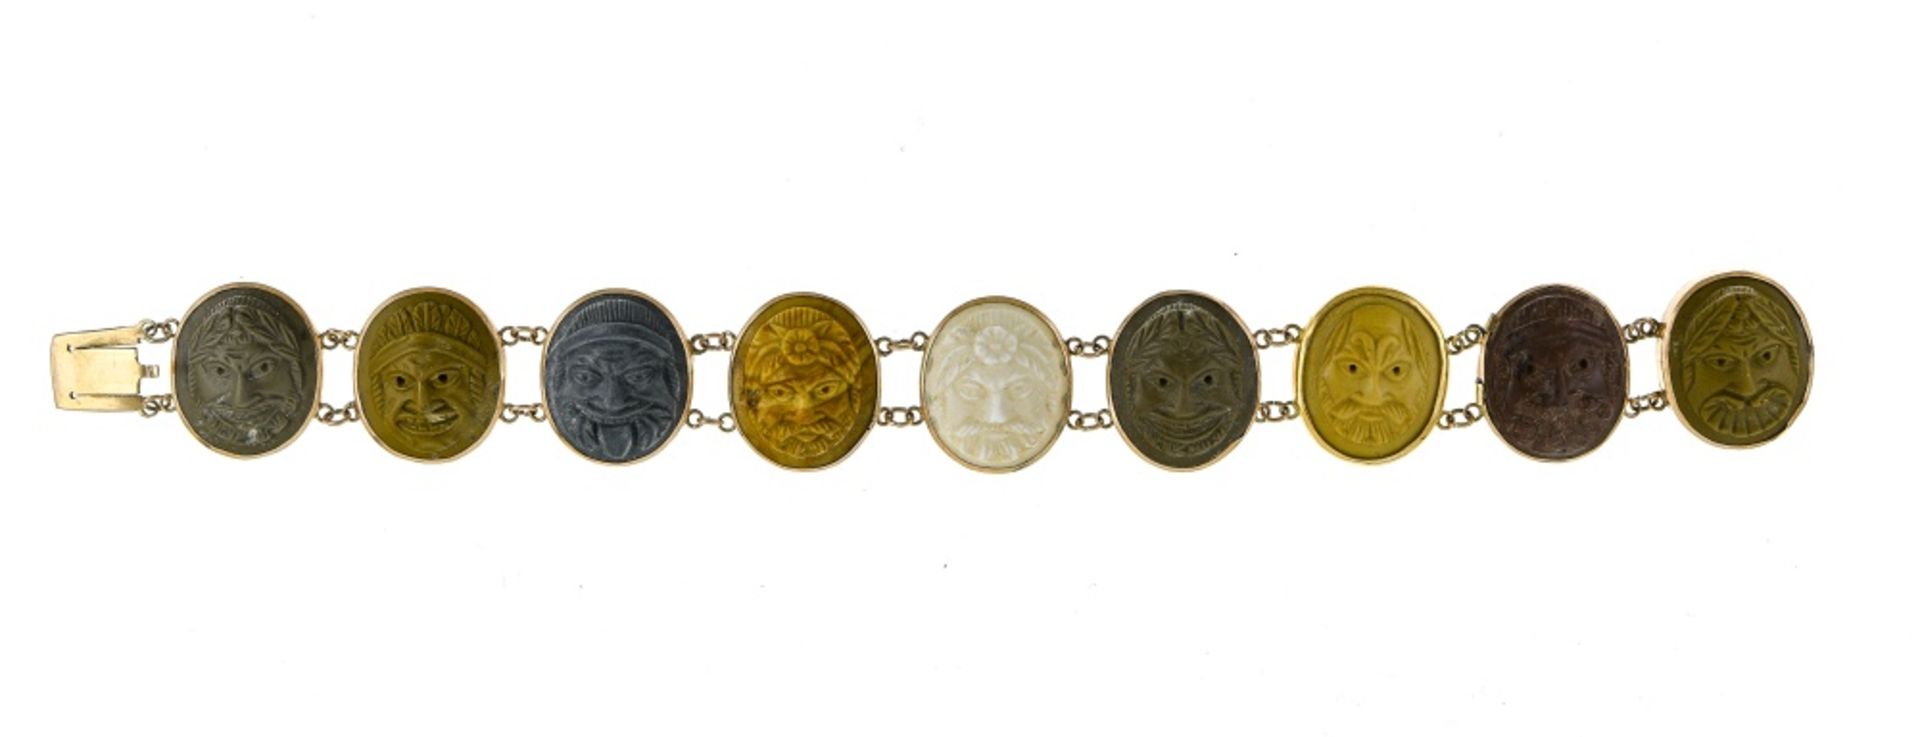 Lava stone bracelet 18 kt yellow gold, composed of 9 medallions set with lava stone cameos of